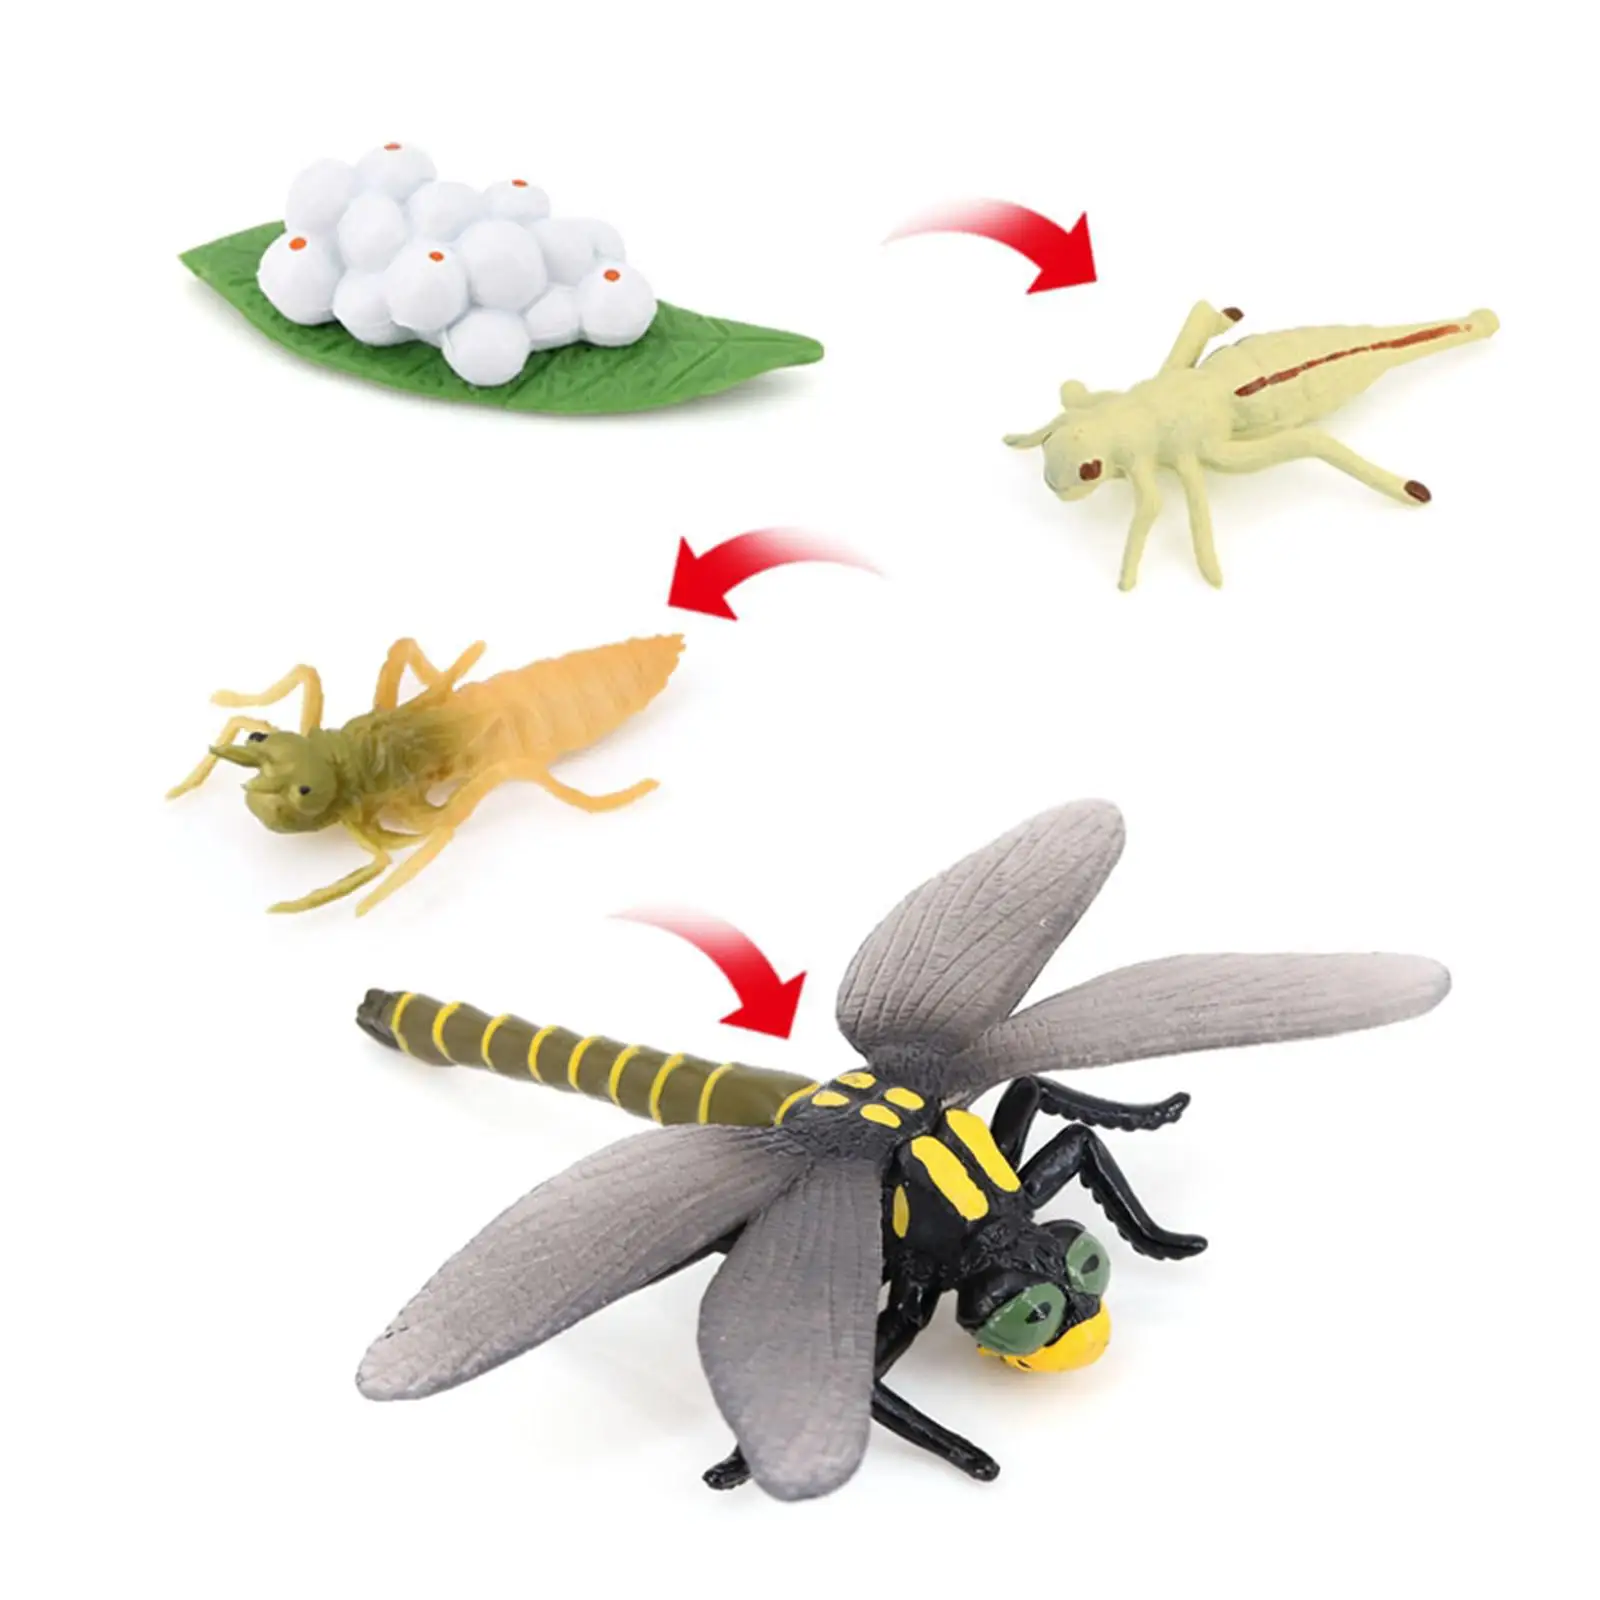 Lot of 4 Nature Dragonfly Growth Cycle Early Childhood Education Learning Teaching Toys, Realistic